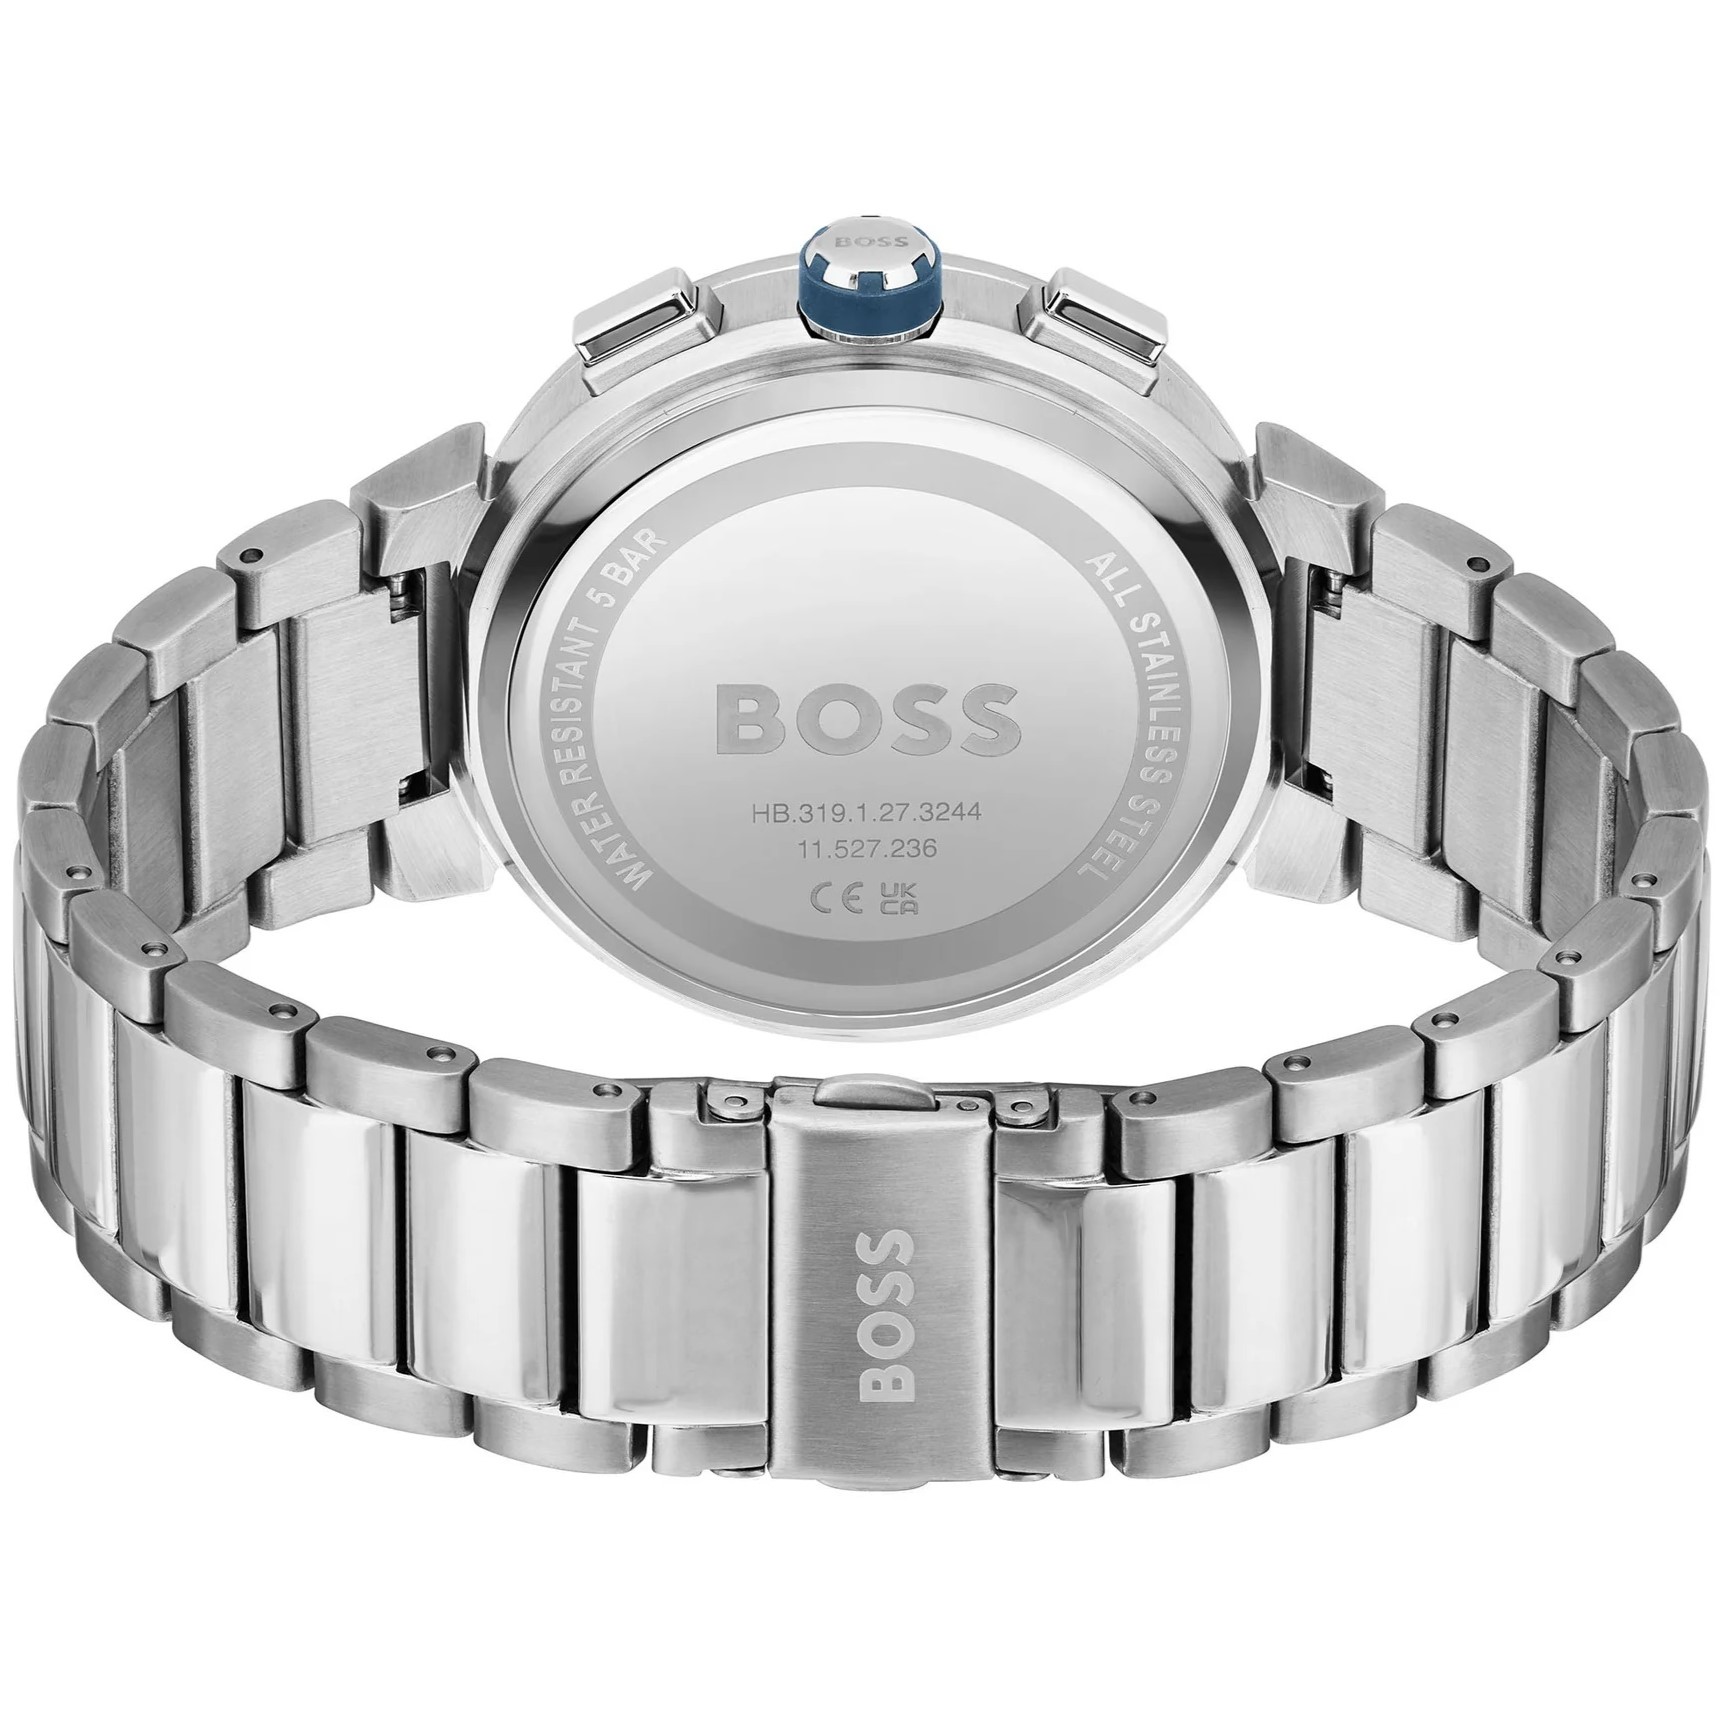 ĐỒNG HỒ NAM HUGO BOSS STAINLESS STEEL BLUE DIAL CHRONOGRAPH MENS WATCH 1513999 2